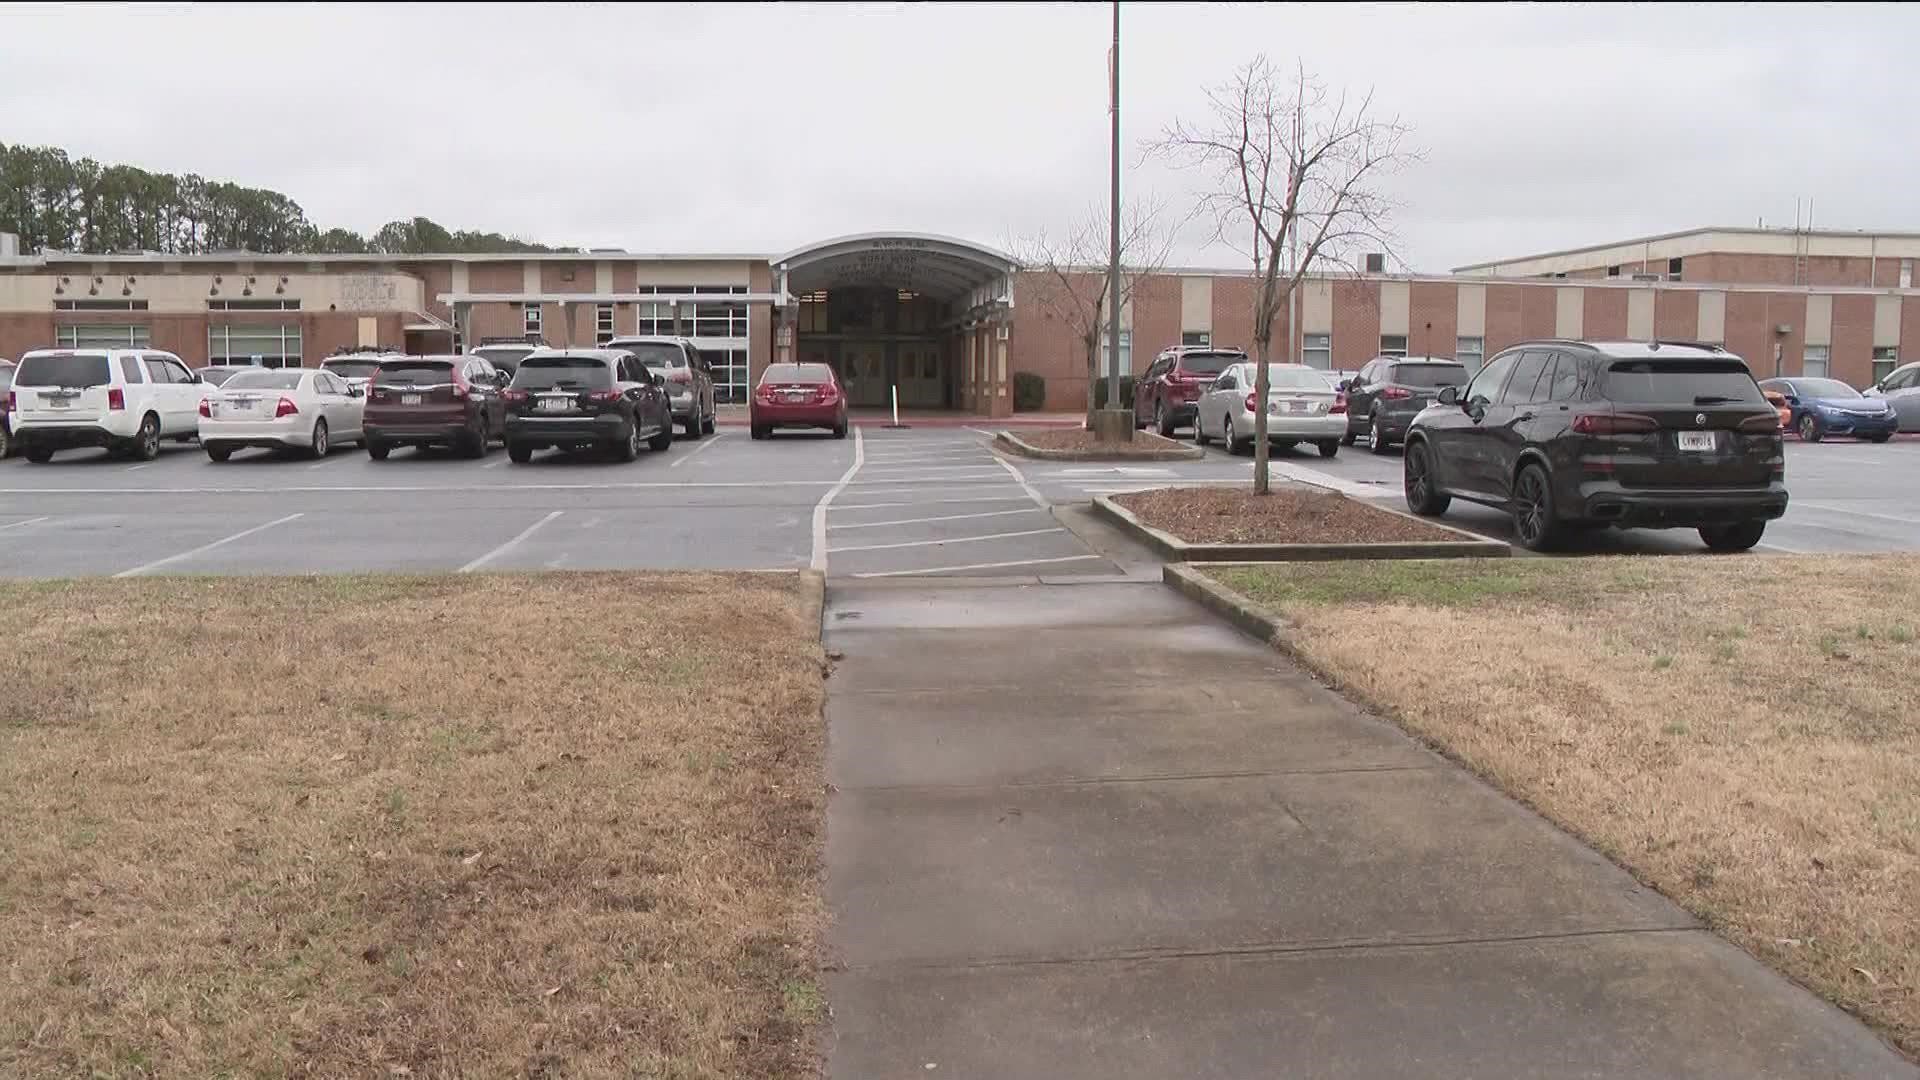 Students, parents, and teachers are on edge after a school fight. Witnesses say a student was stabbed.